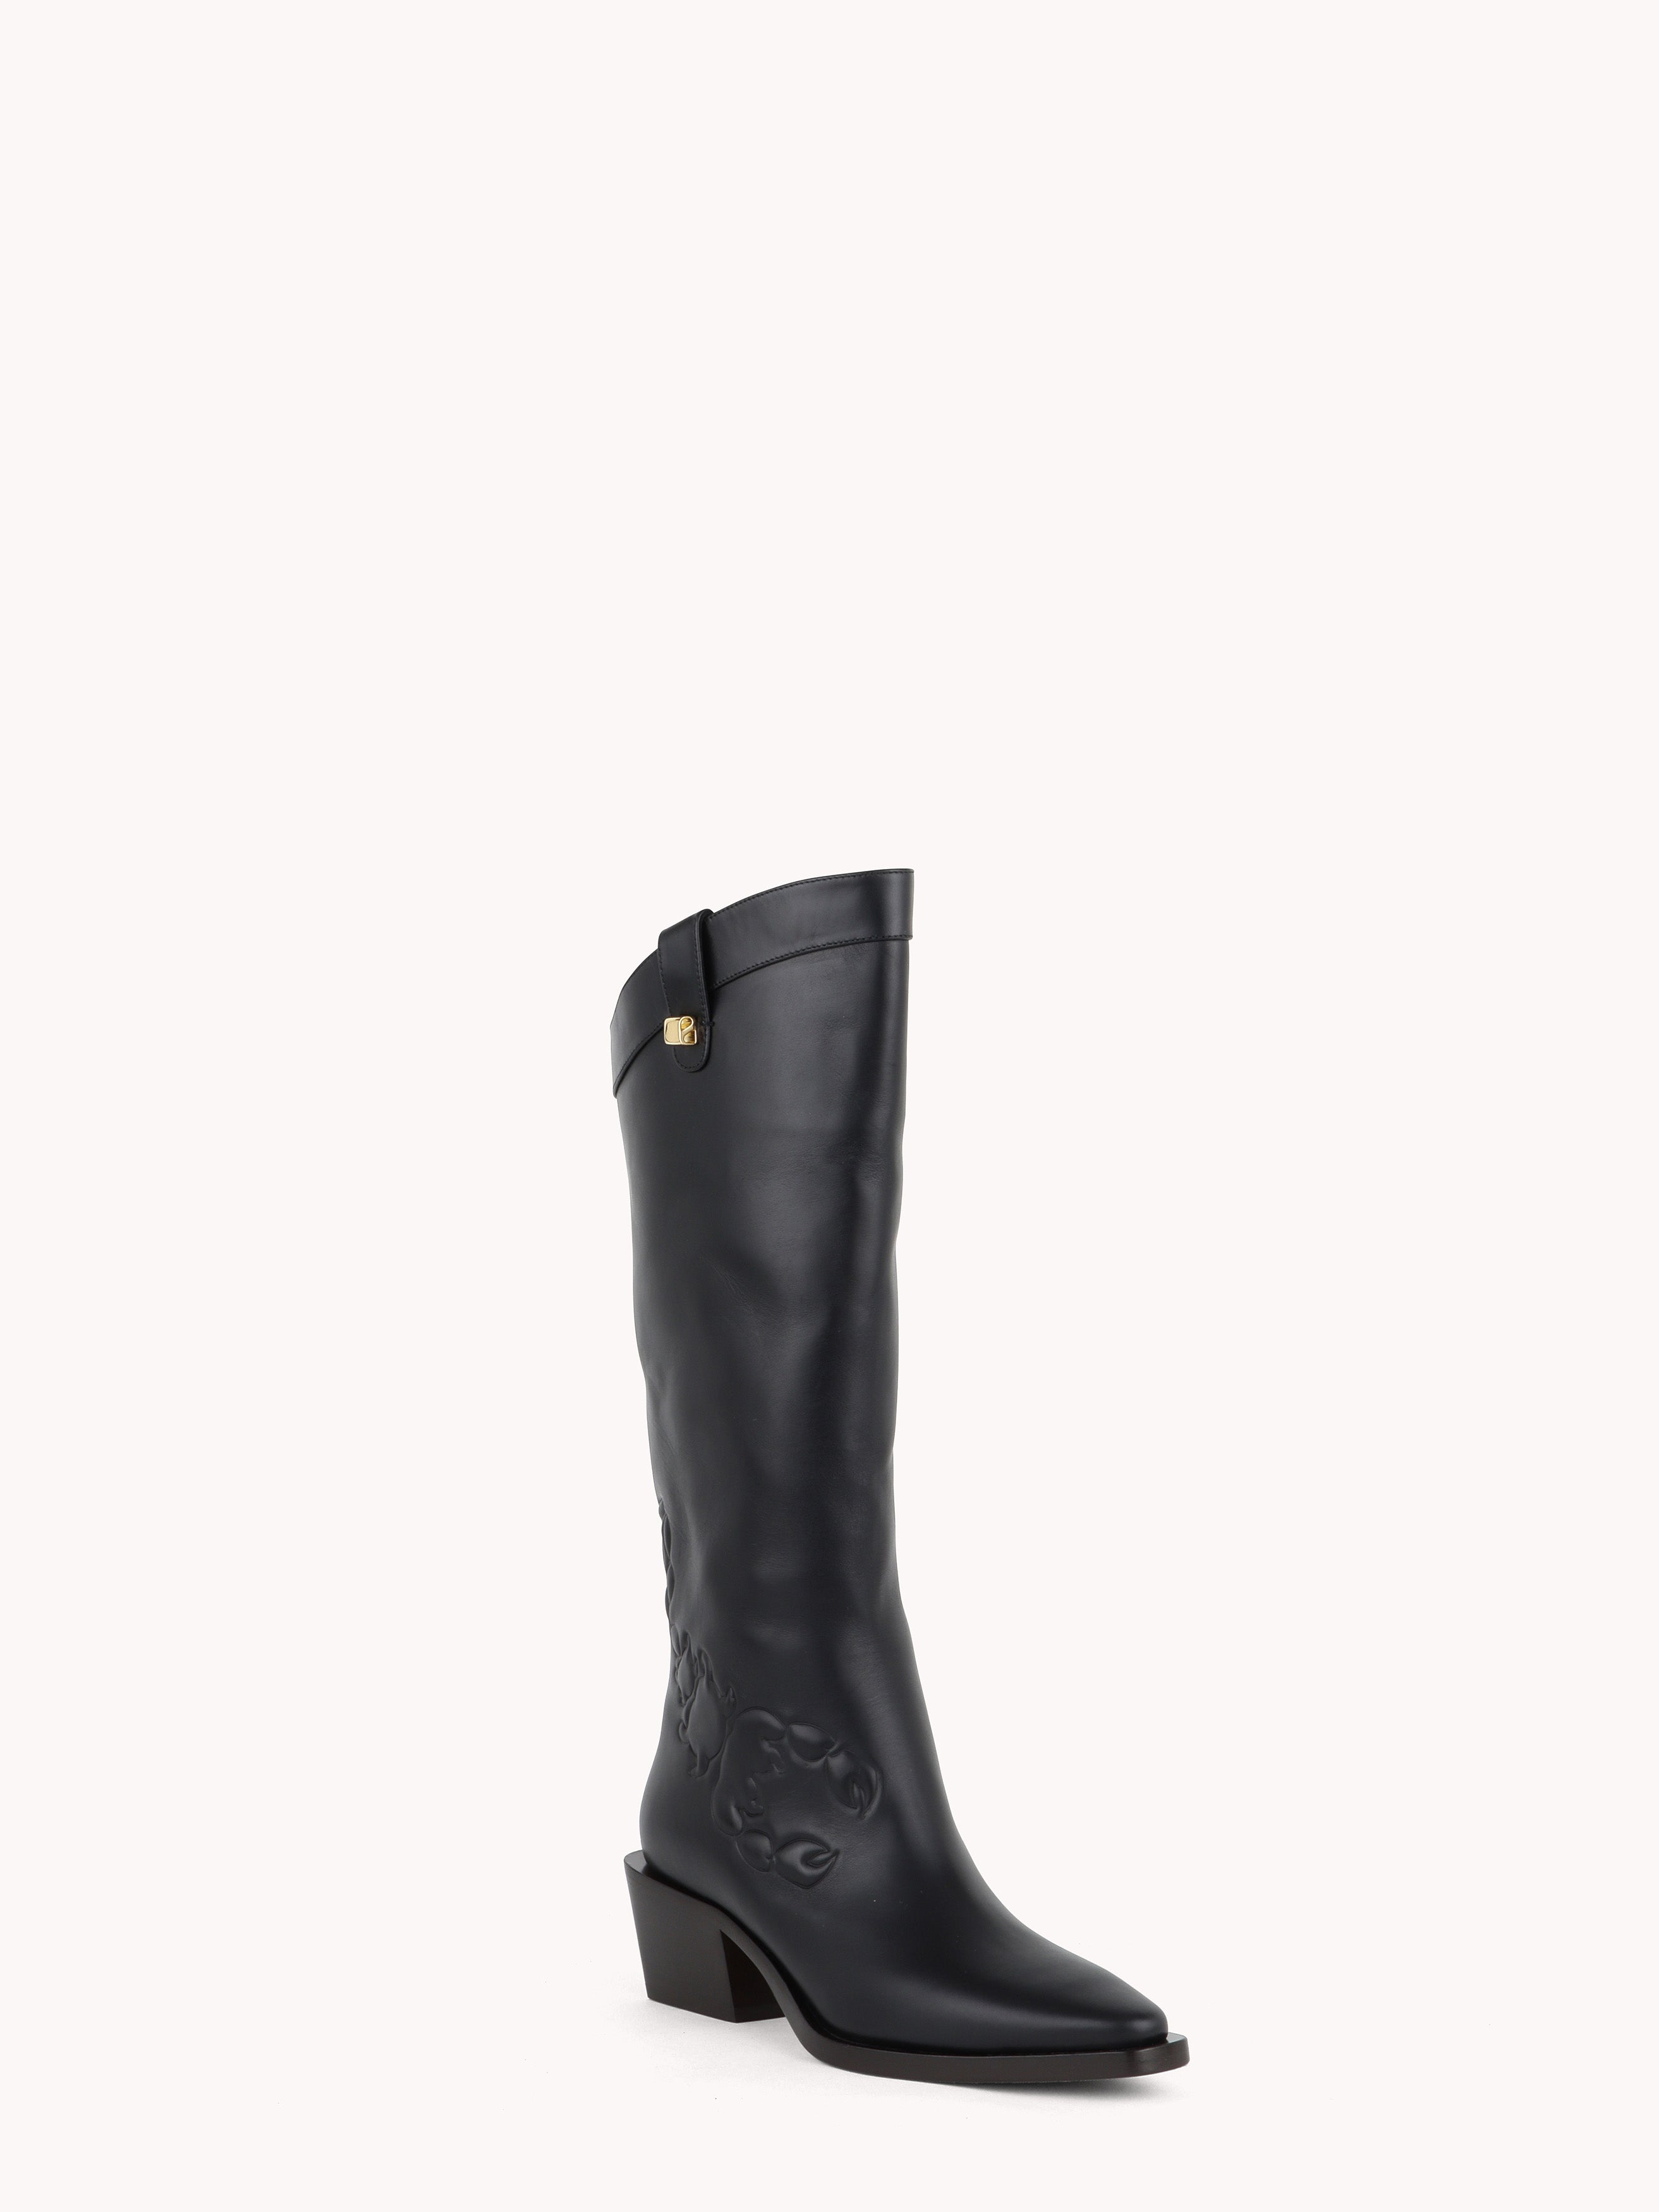 Sienna Black Nappa Leather Western Boots